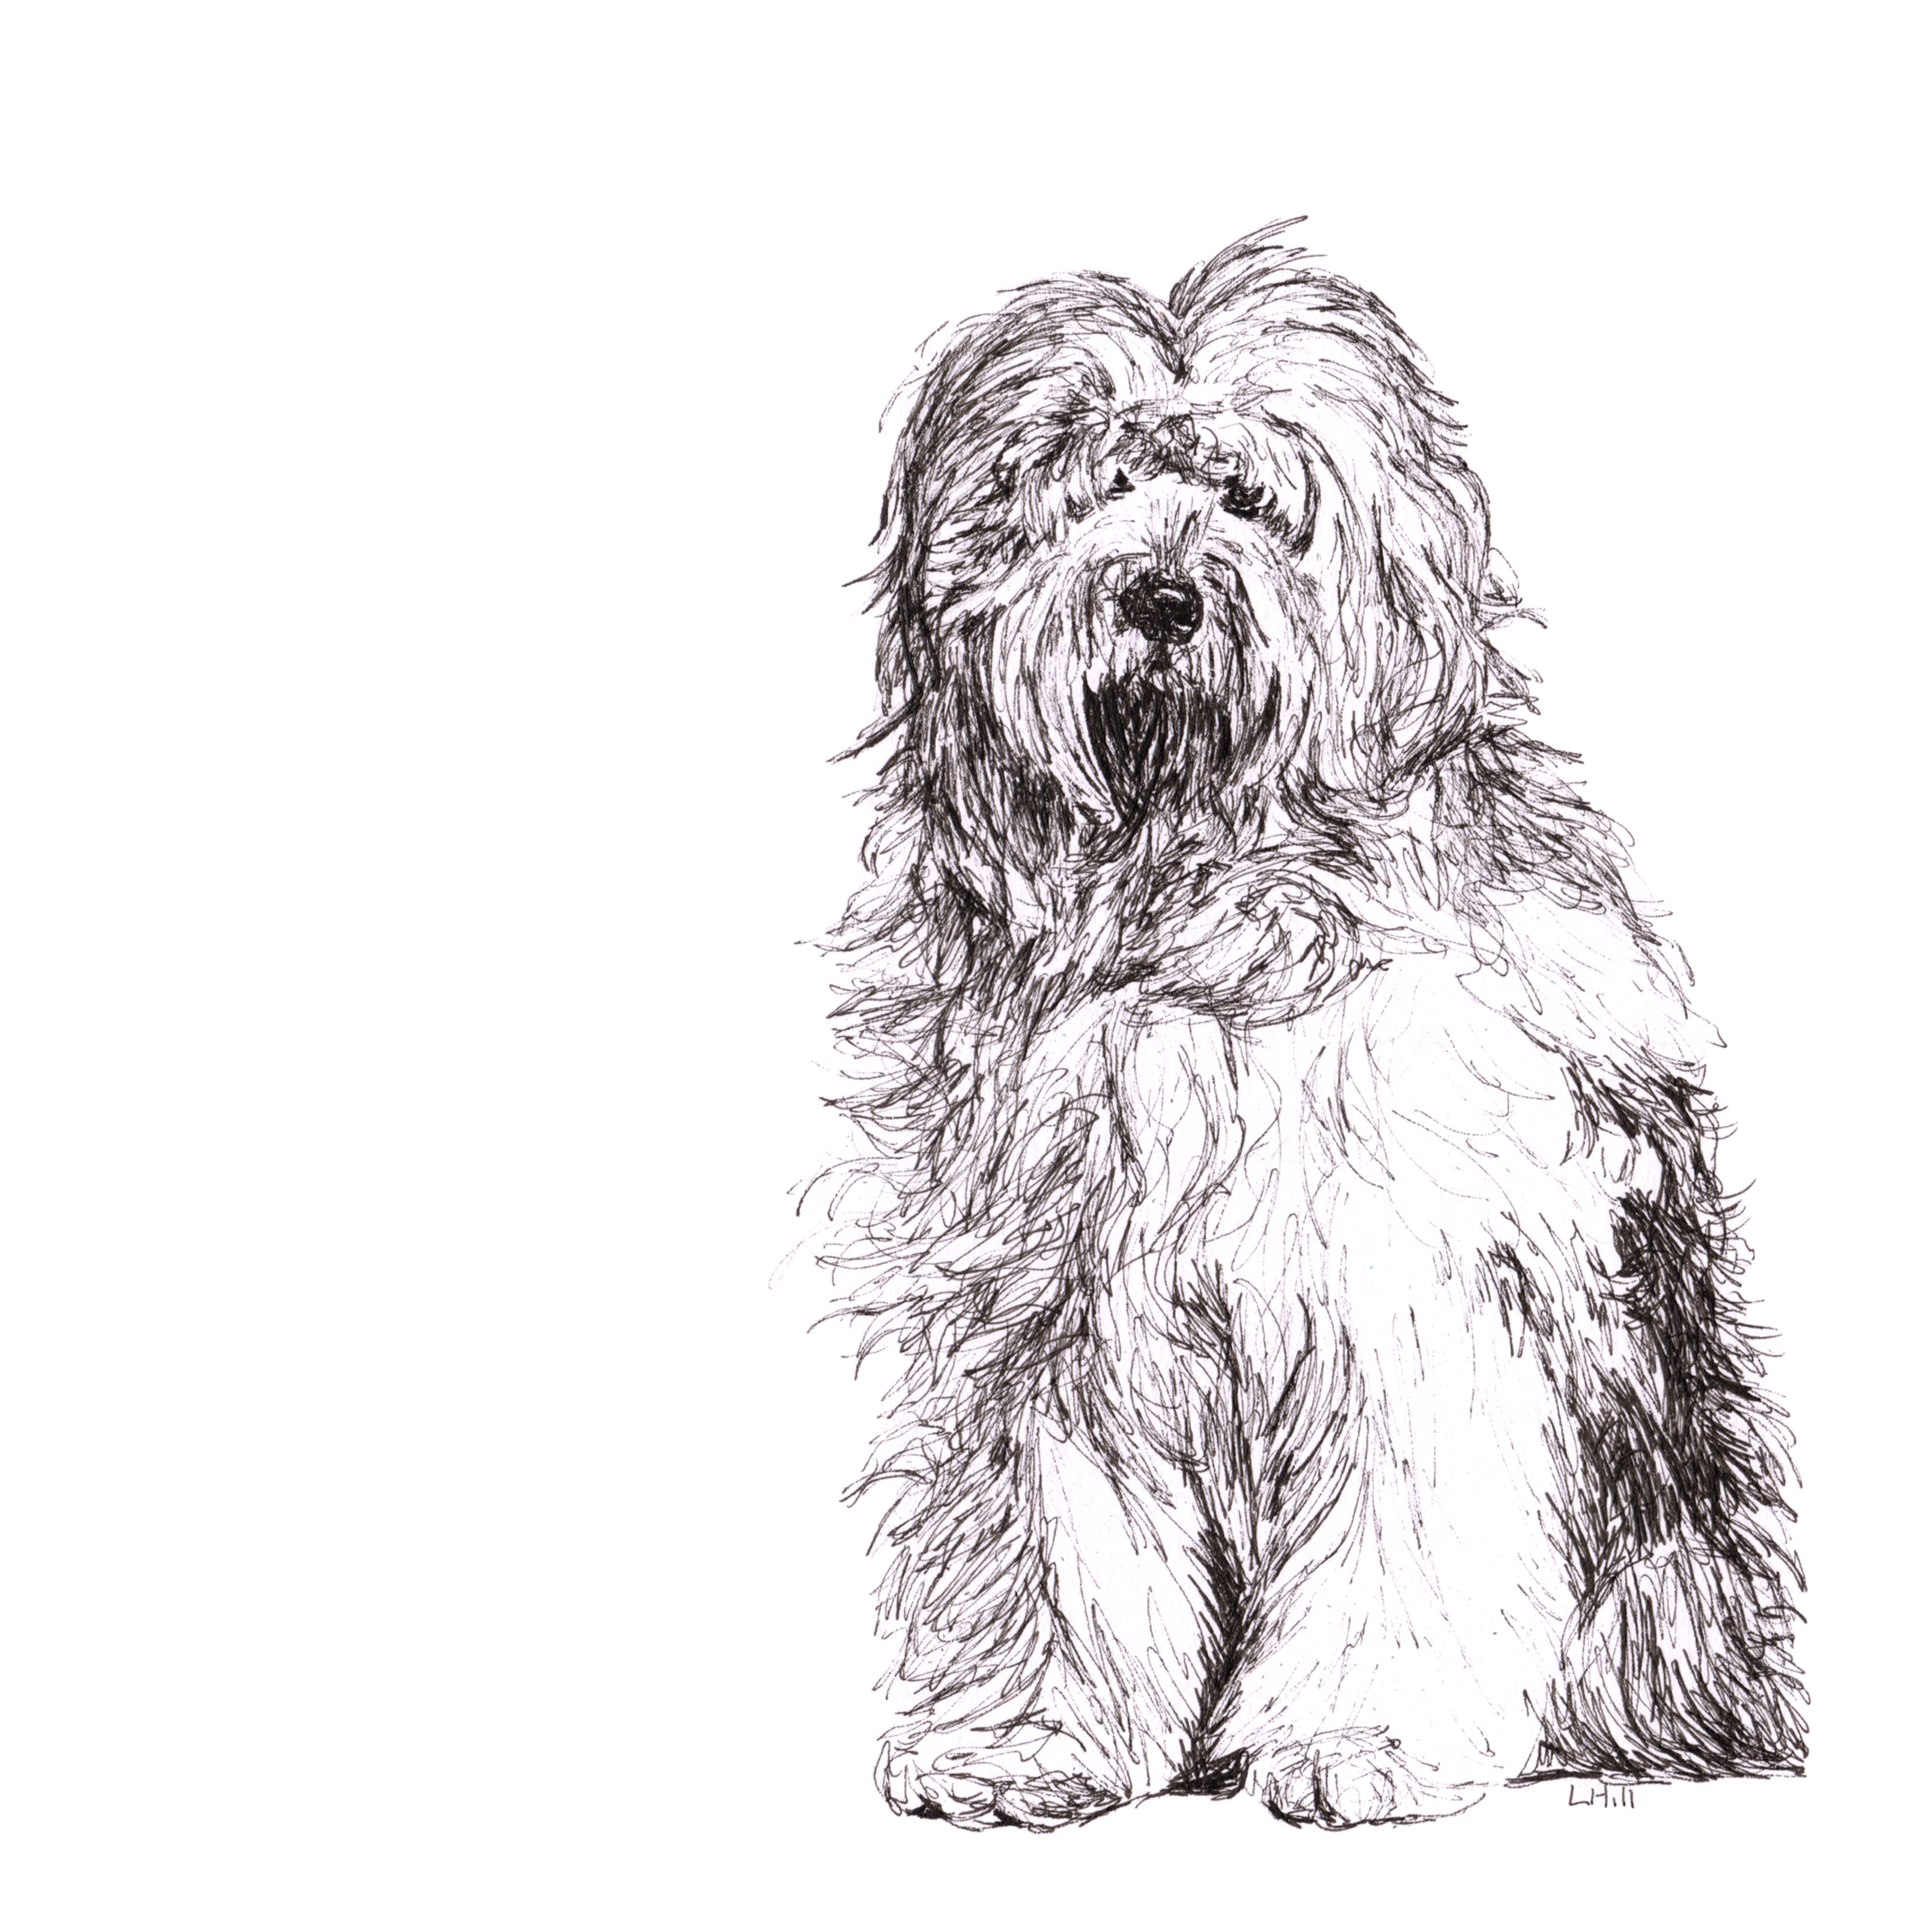 Old English Sheepdog pen and ink illustration by Louisa Hill